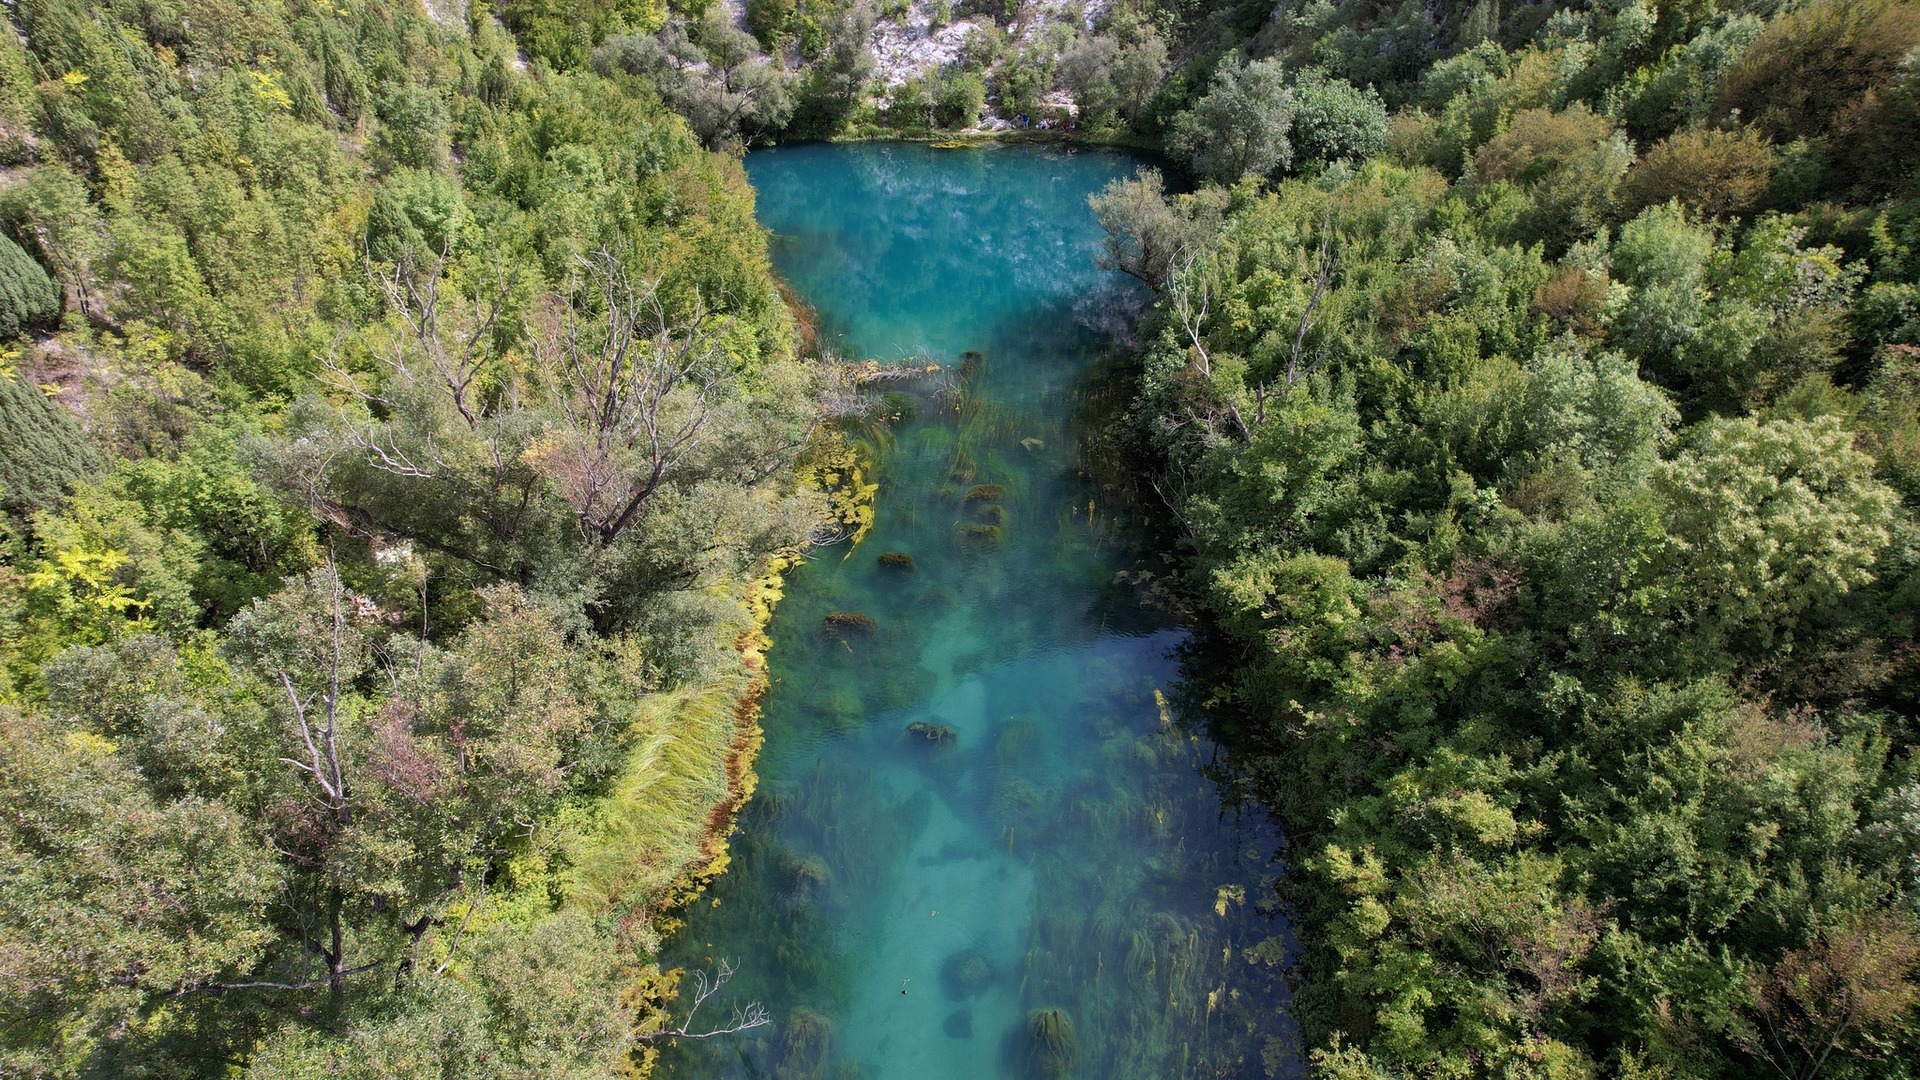 Assessing Status of Fungi Inhabiting Neretva River as an Important Step Towards Identifying Top Priority Freshwater Sites in Bosnia and Herzegovina